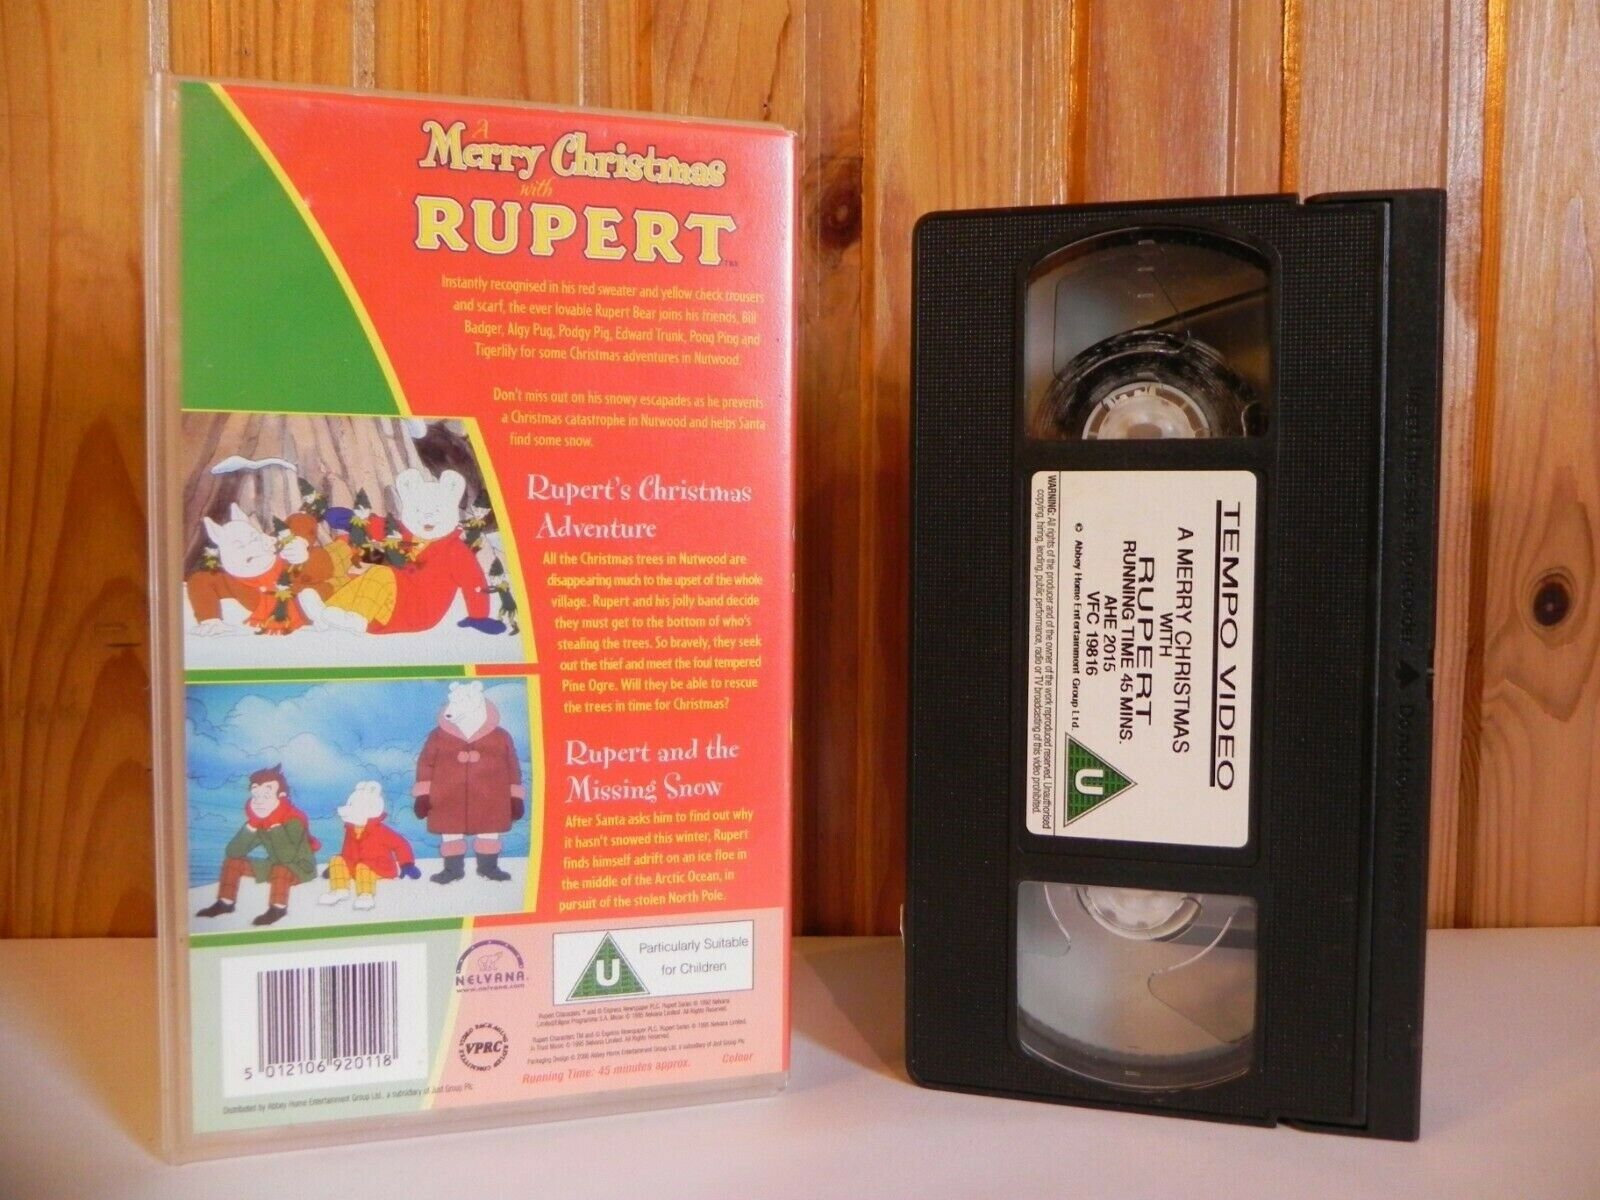 KID'S VIDEO - MERRY CHRISTMAS RUPERT - TEMPO VIDEO - CHILDRENS ANIMATION - VHS-